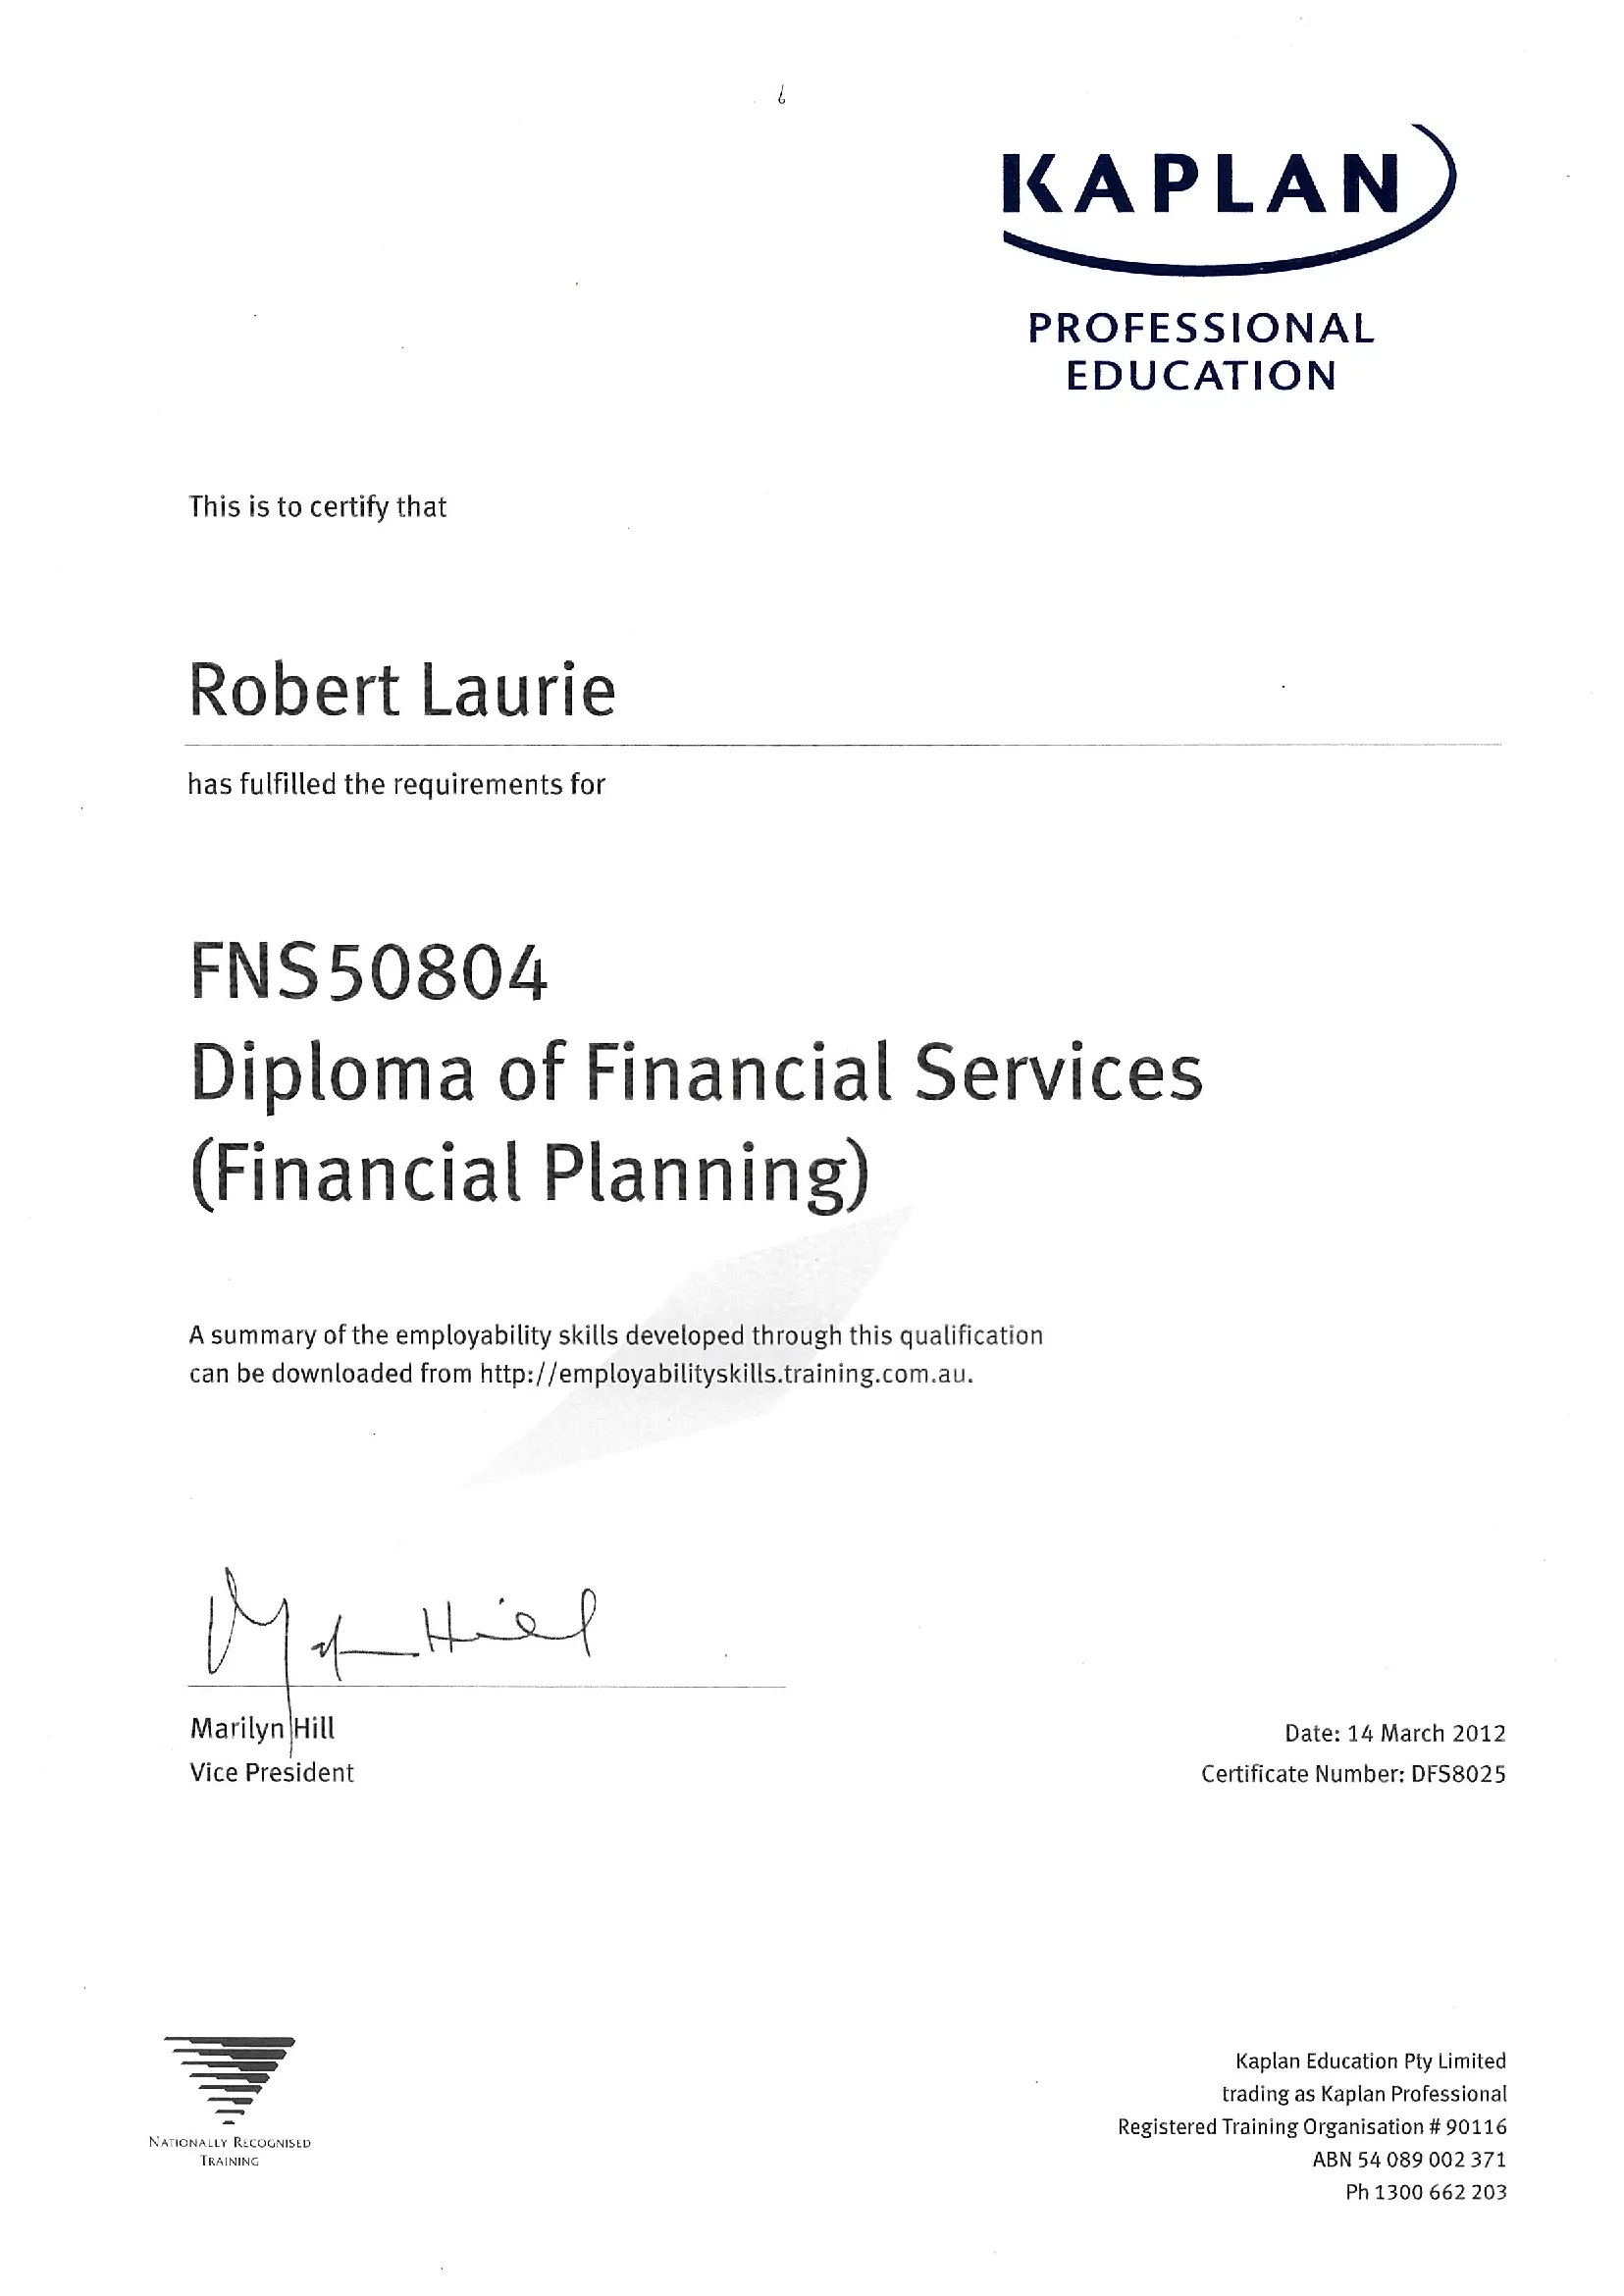 Diploma-of-Financial-Services-Certificate